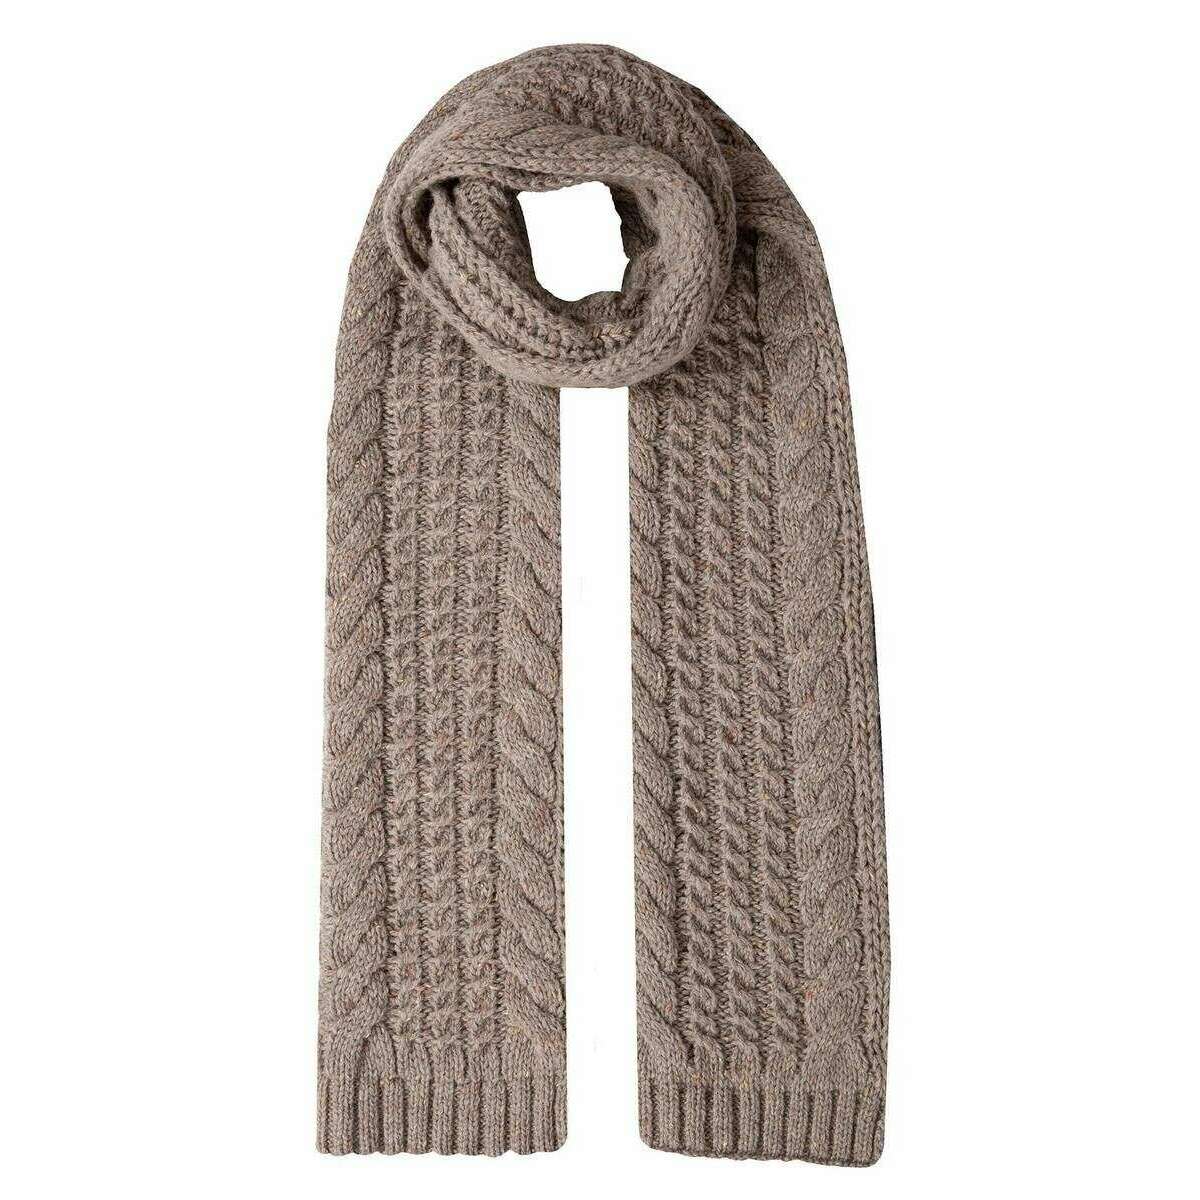 Dents Cable Knit Marl Scarf - Oatmeal Beige